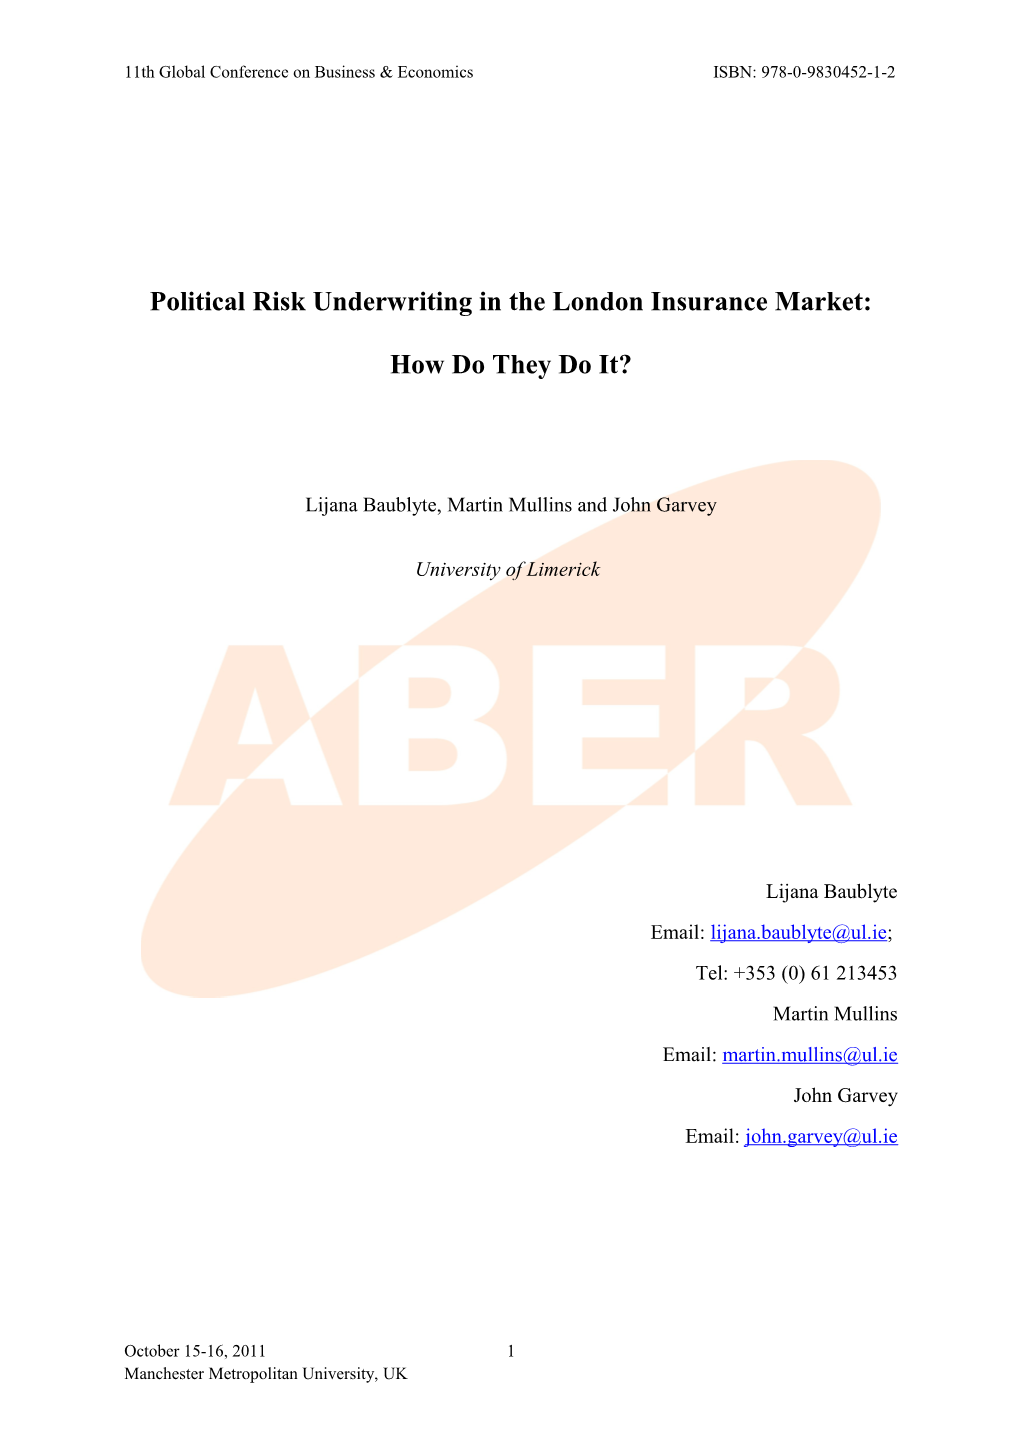 Political Risk Underwriting in the London Insurance Market: How Do They Do It?